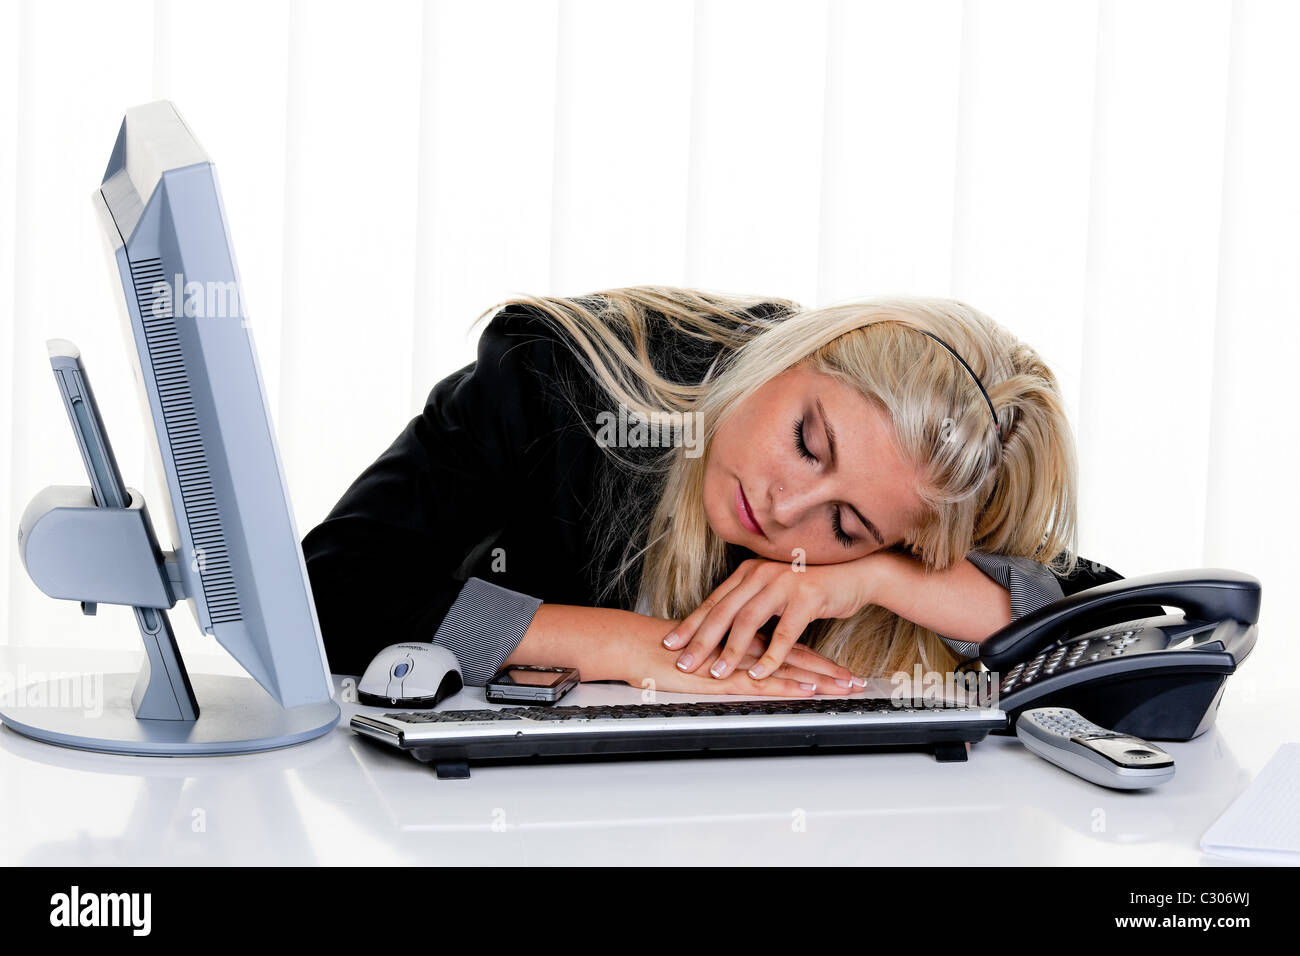 Tired woman with computer Stock Photo